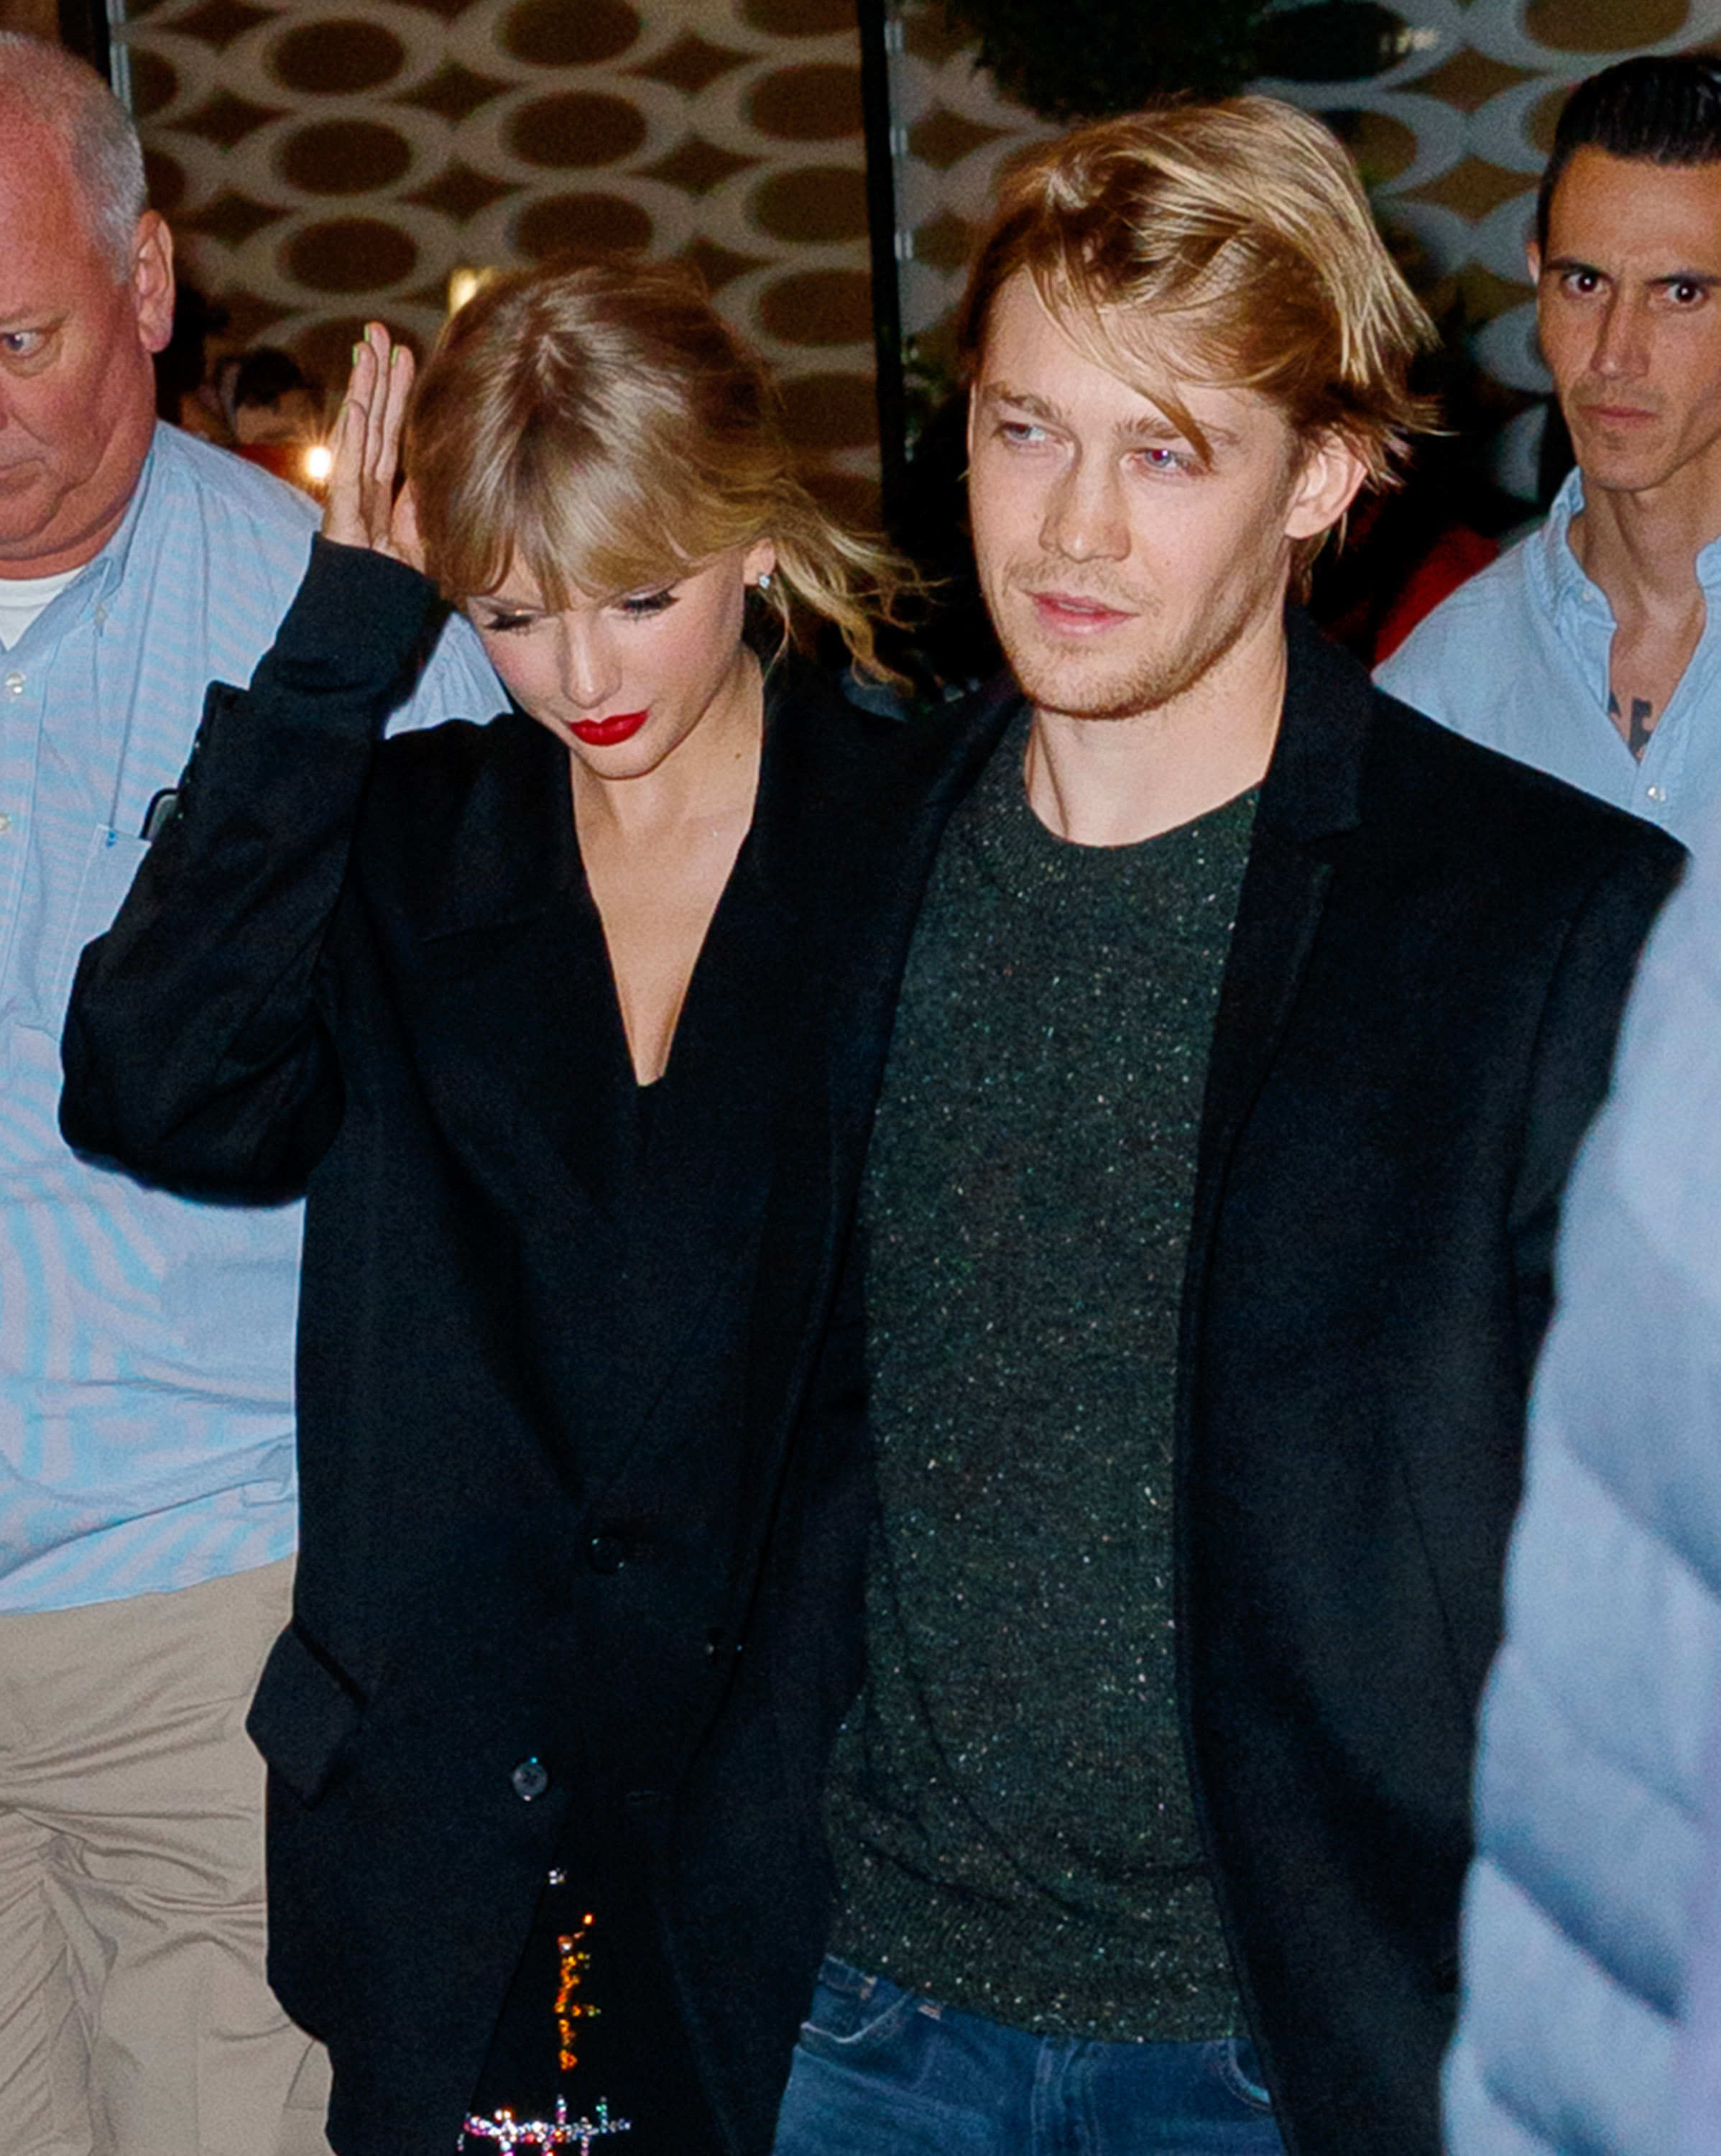 Taylor Swift in a black coat with Joe Alwyn wearing a green shirt and jacket, walking together